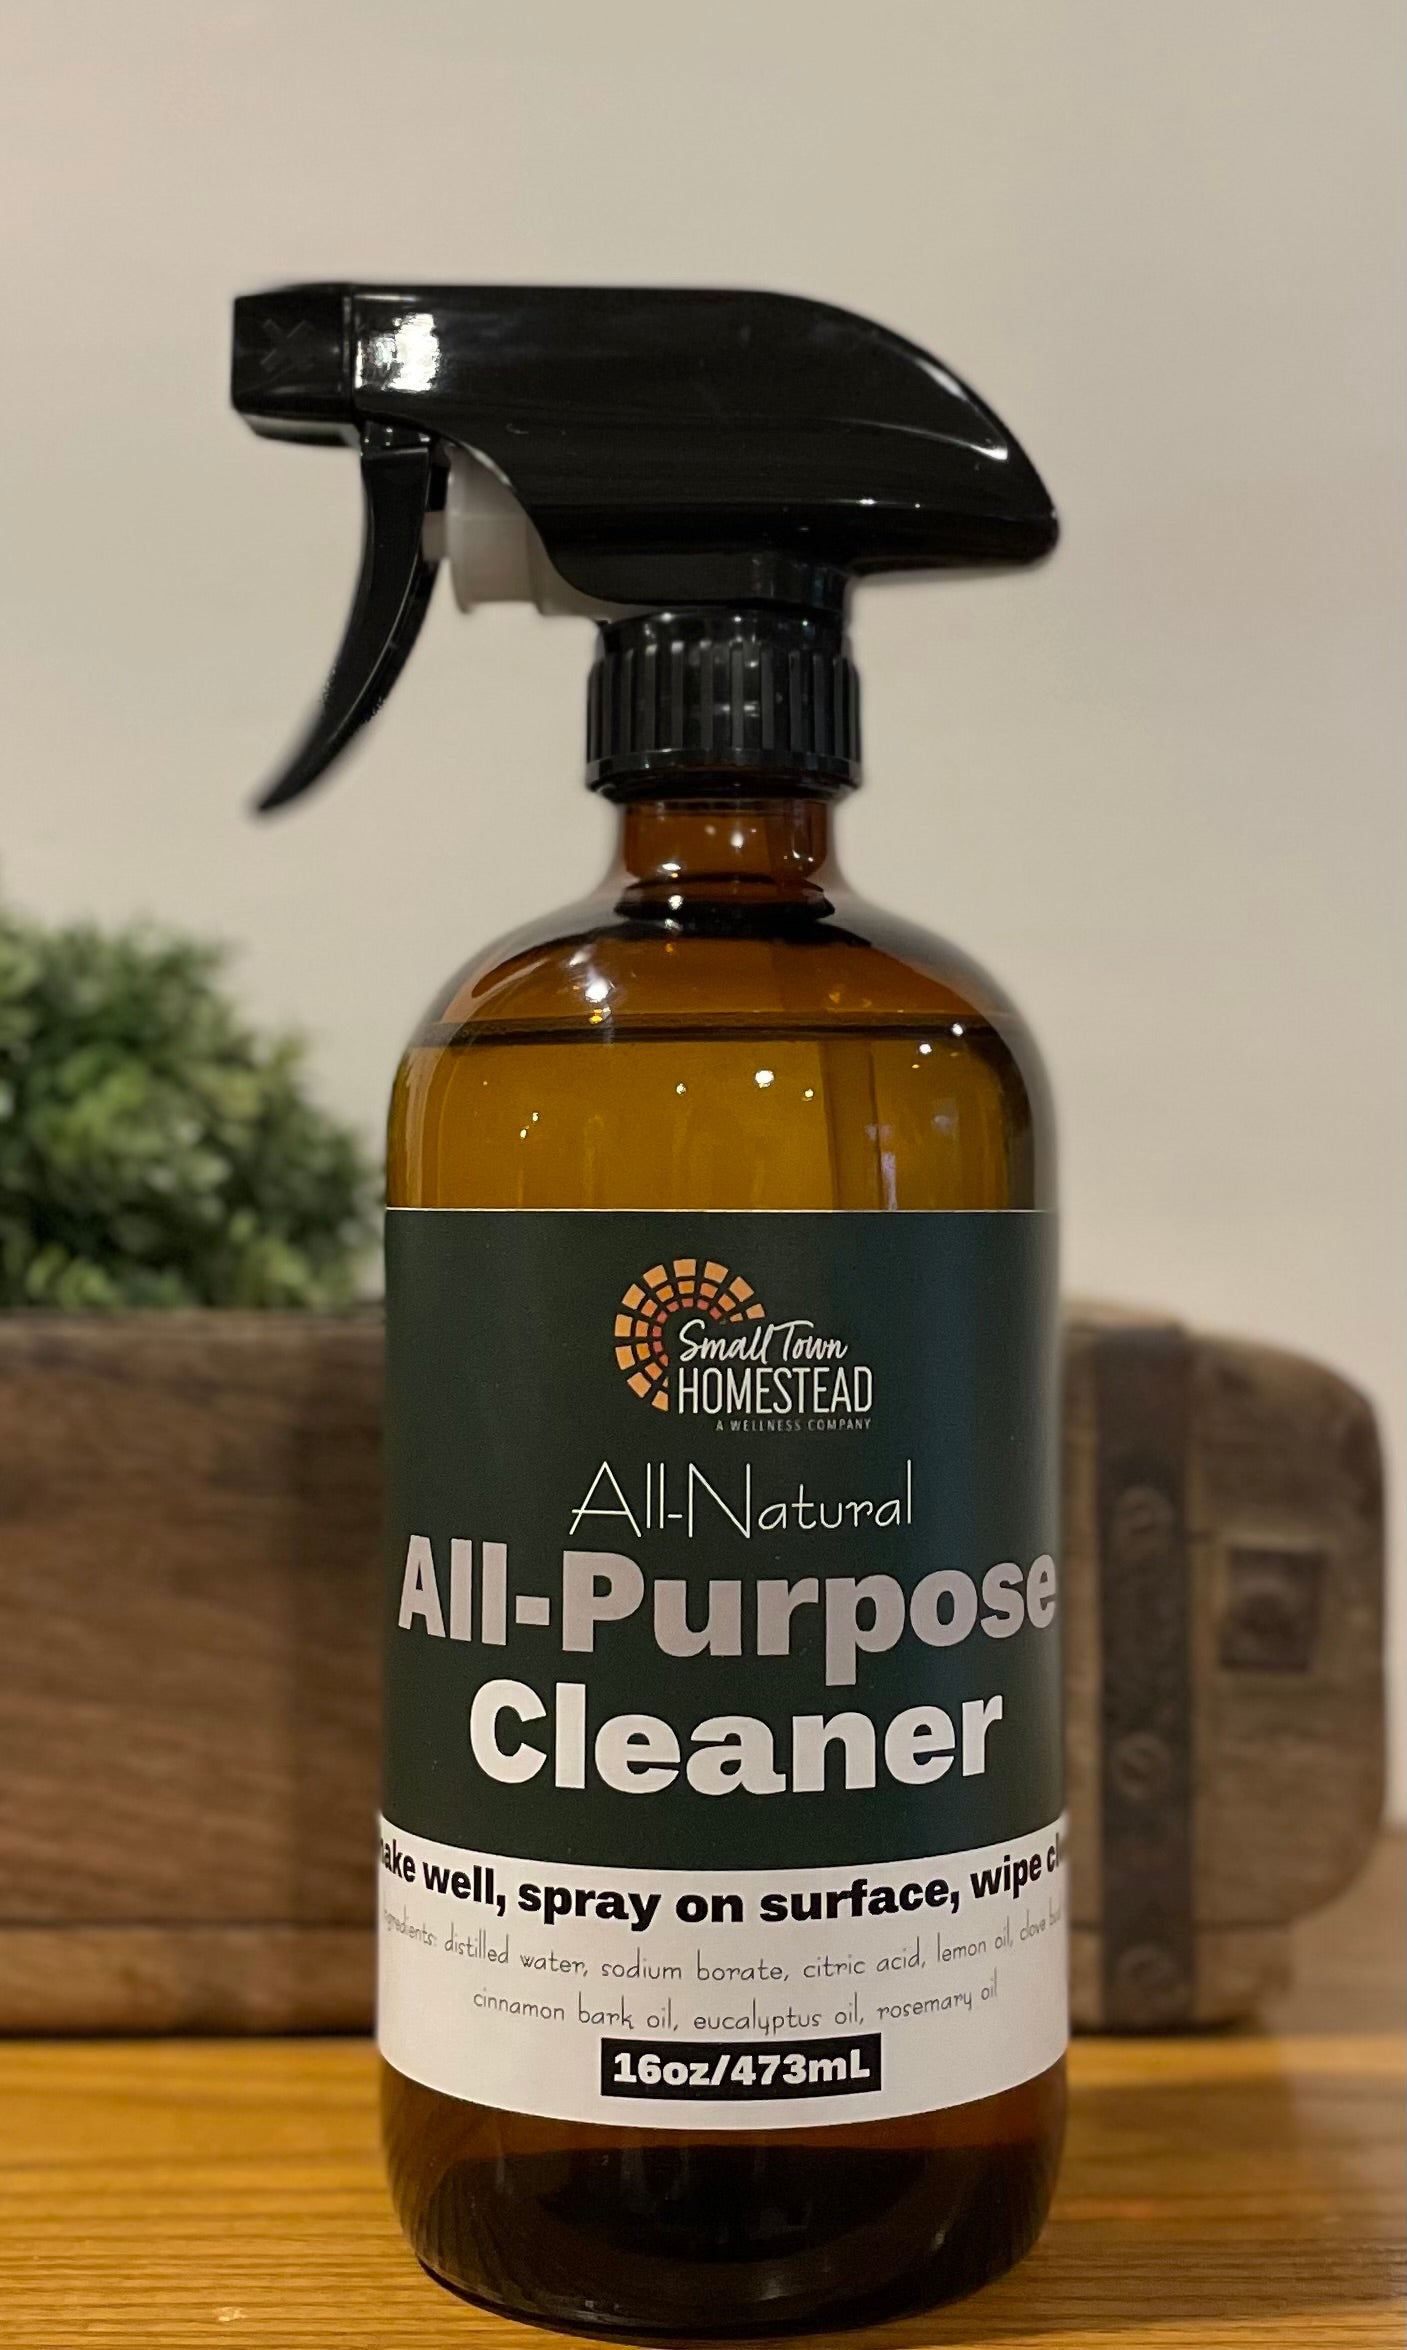 All-Natural Cleaner